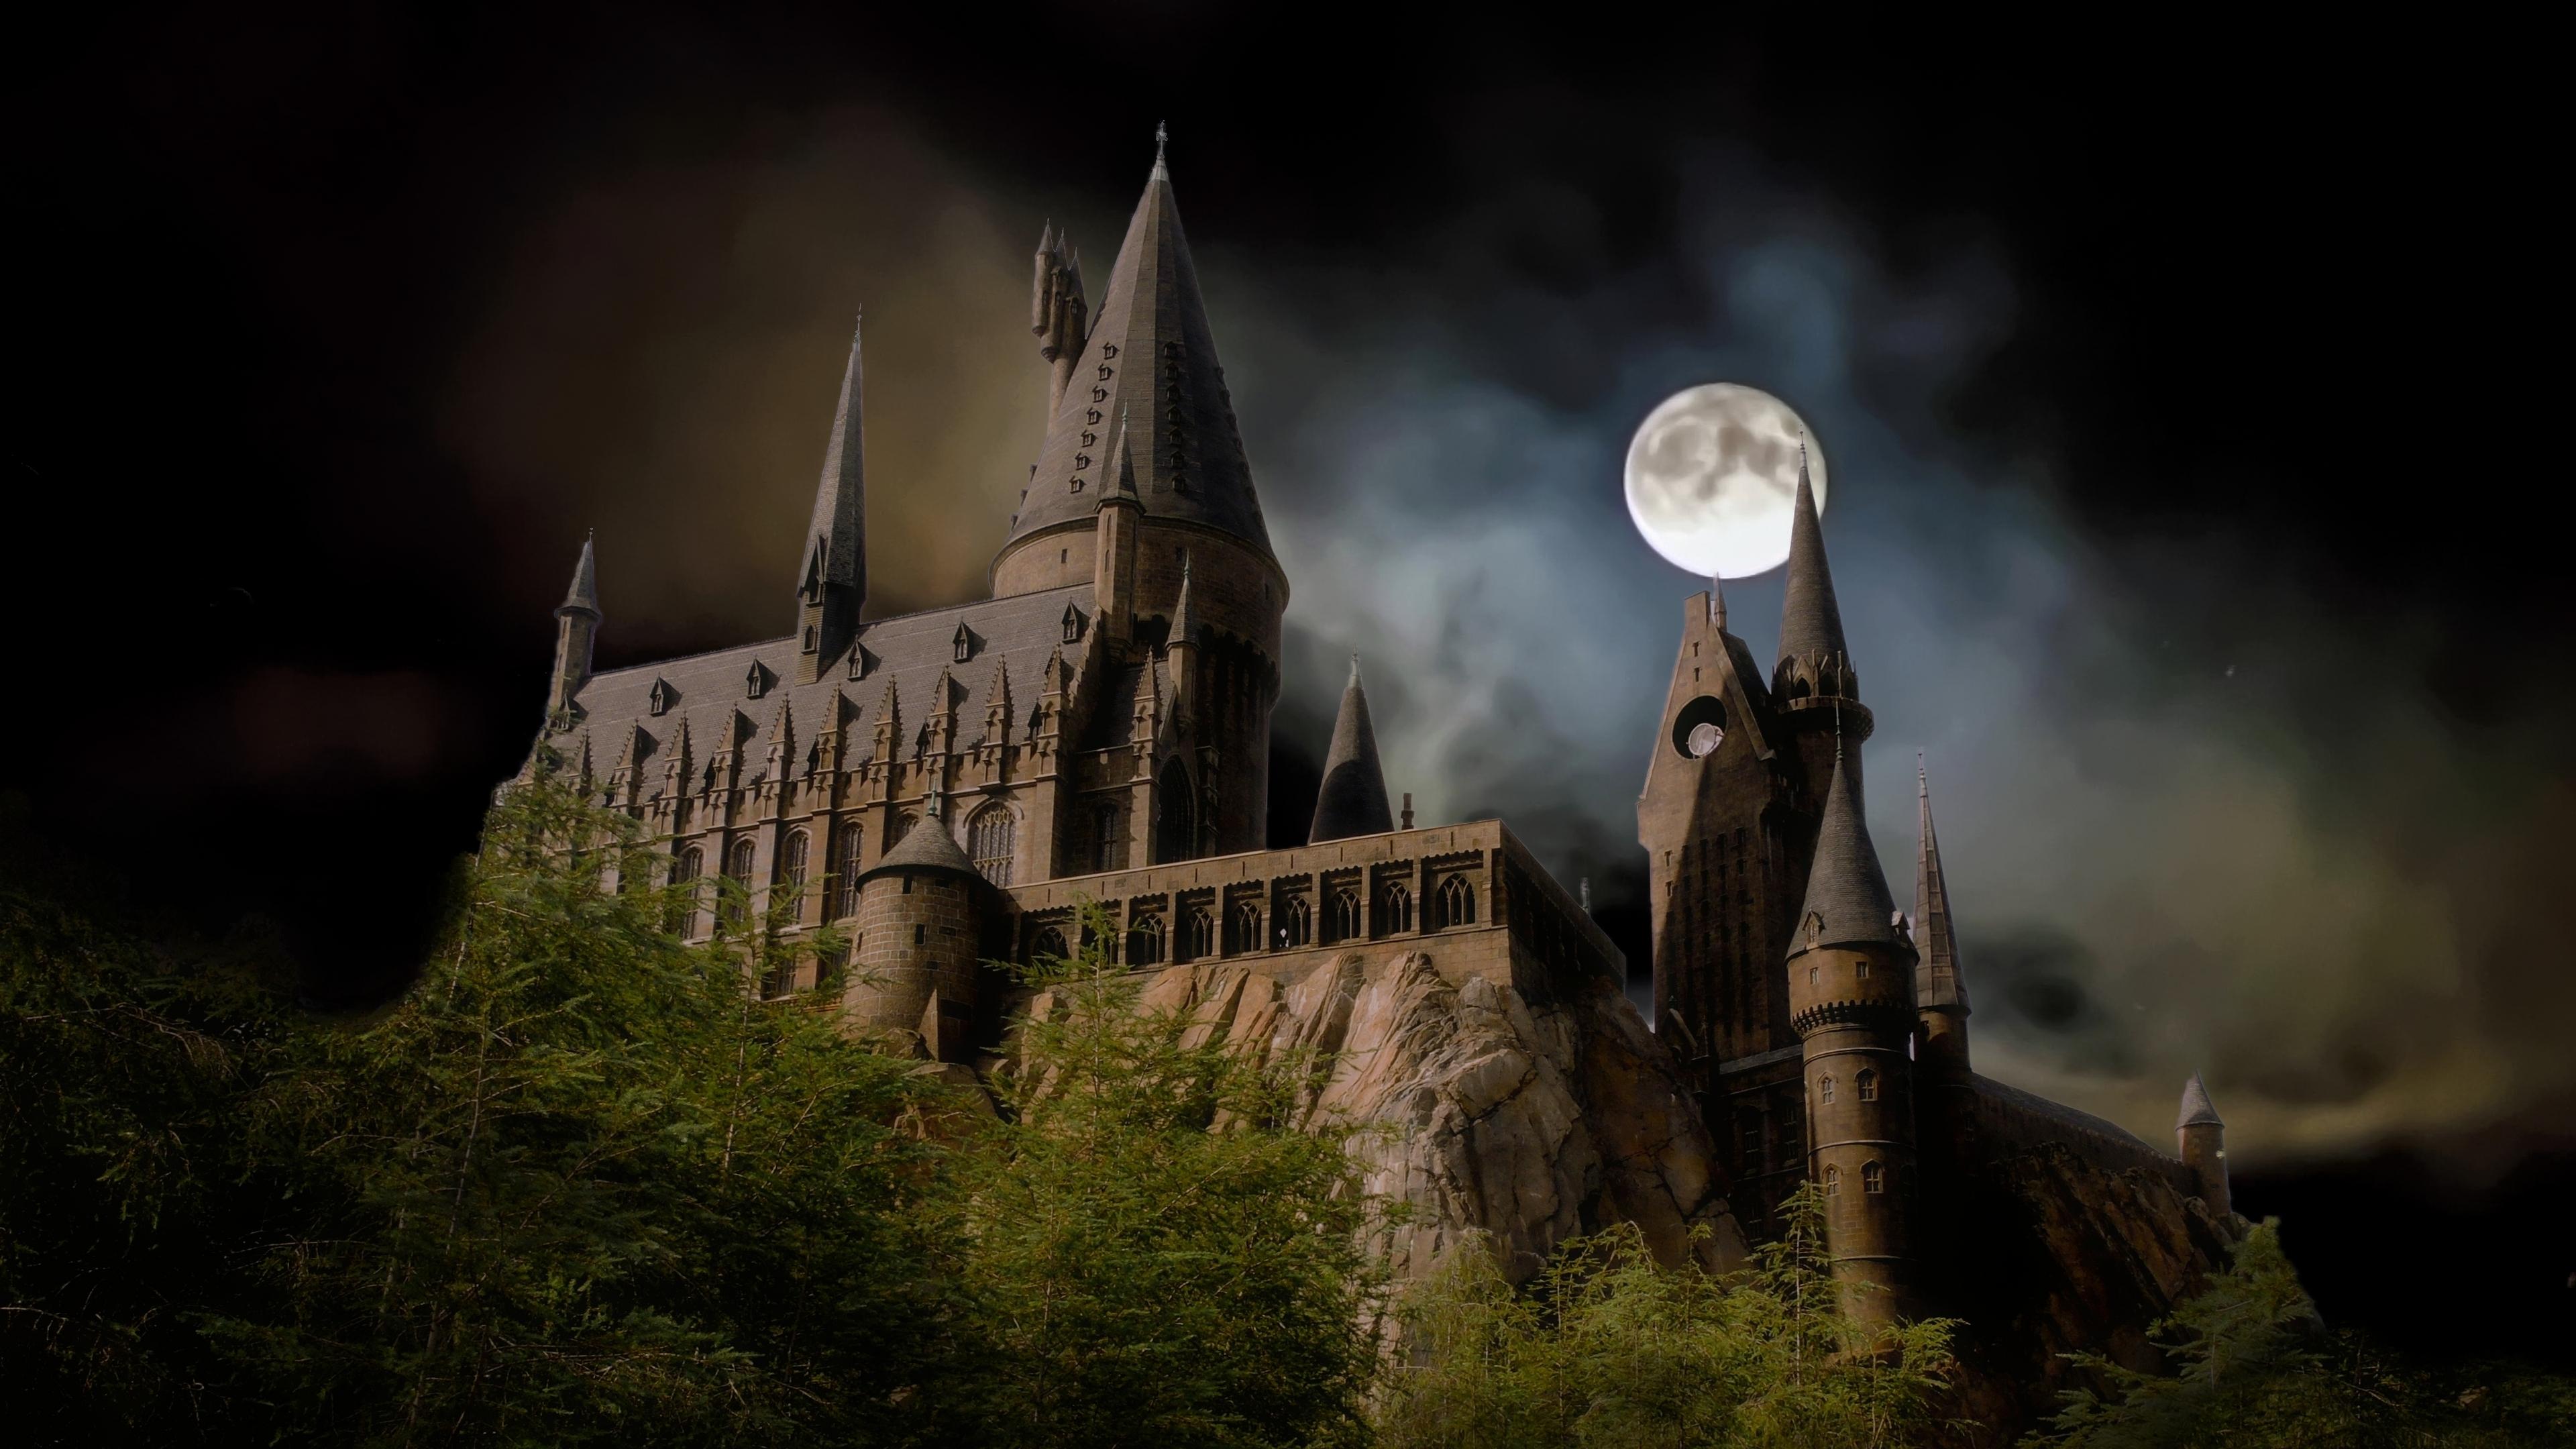 Hogwarts 4K wallpaper for your desktop or mobile screen free and easy to download